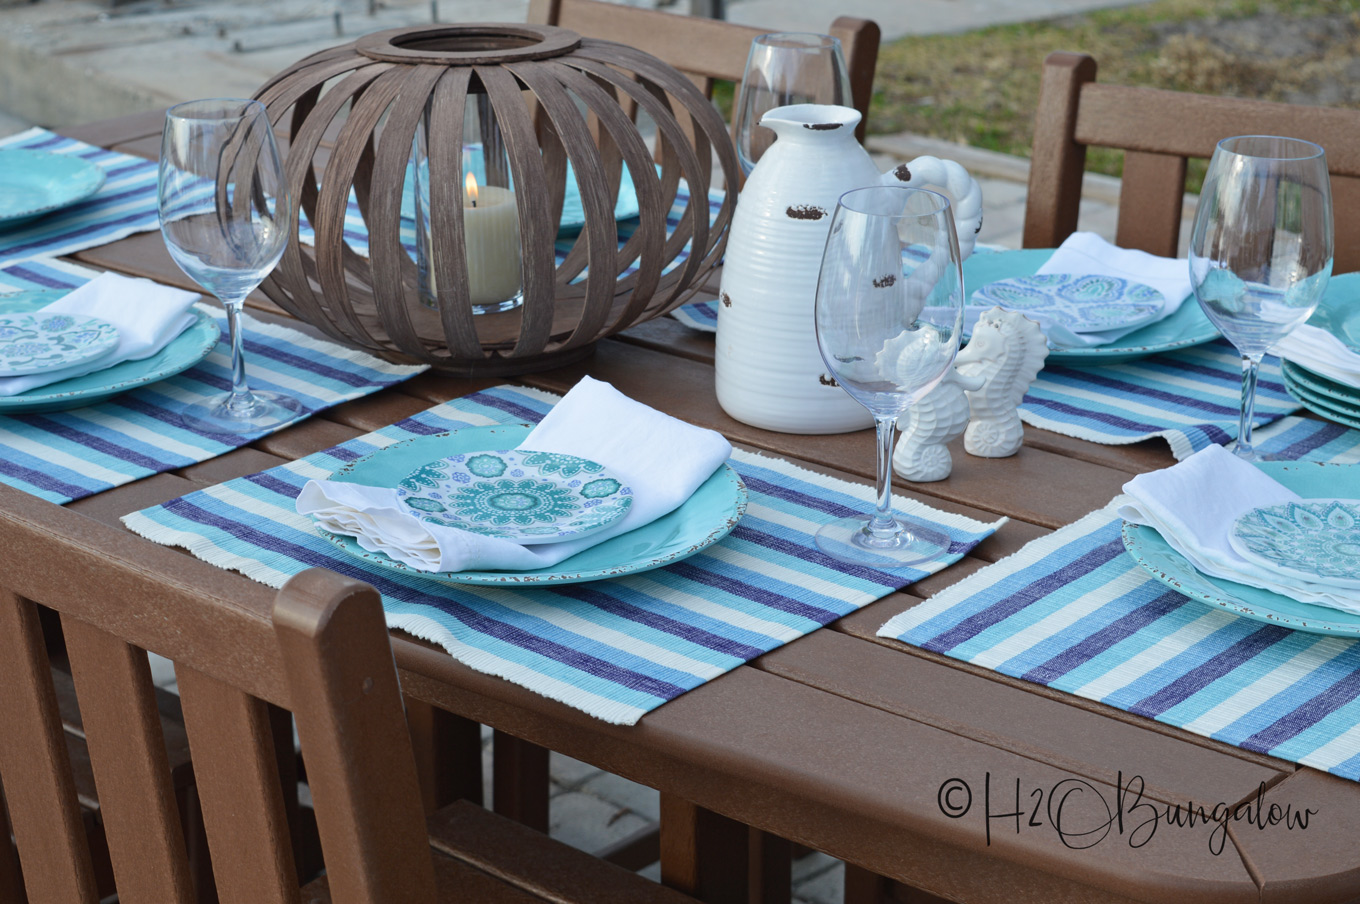 Outdoor dining table set with blue and white striped placemats and coastal colored dinnerware and wooden lantern as part of the centerpiece.